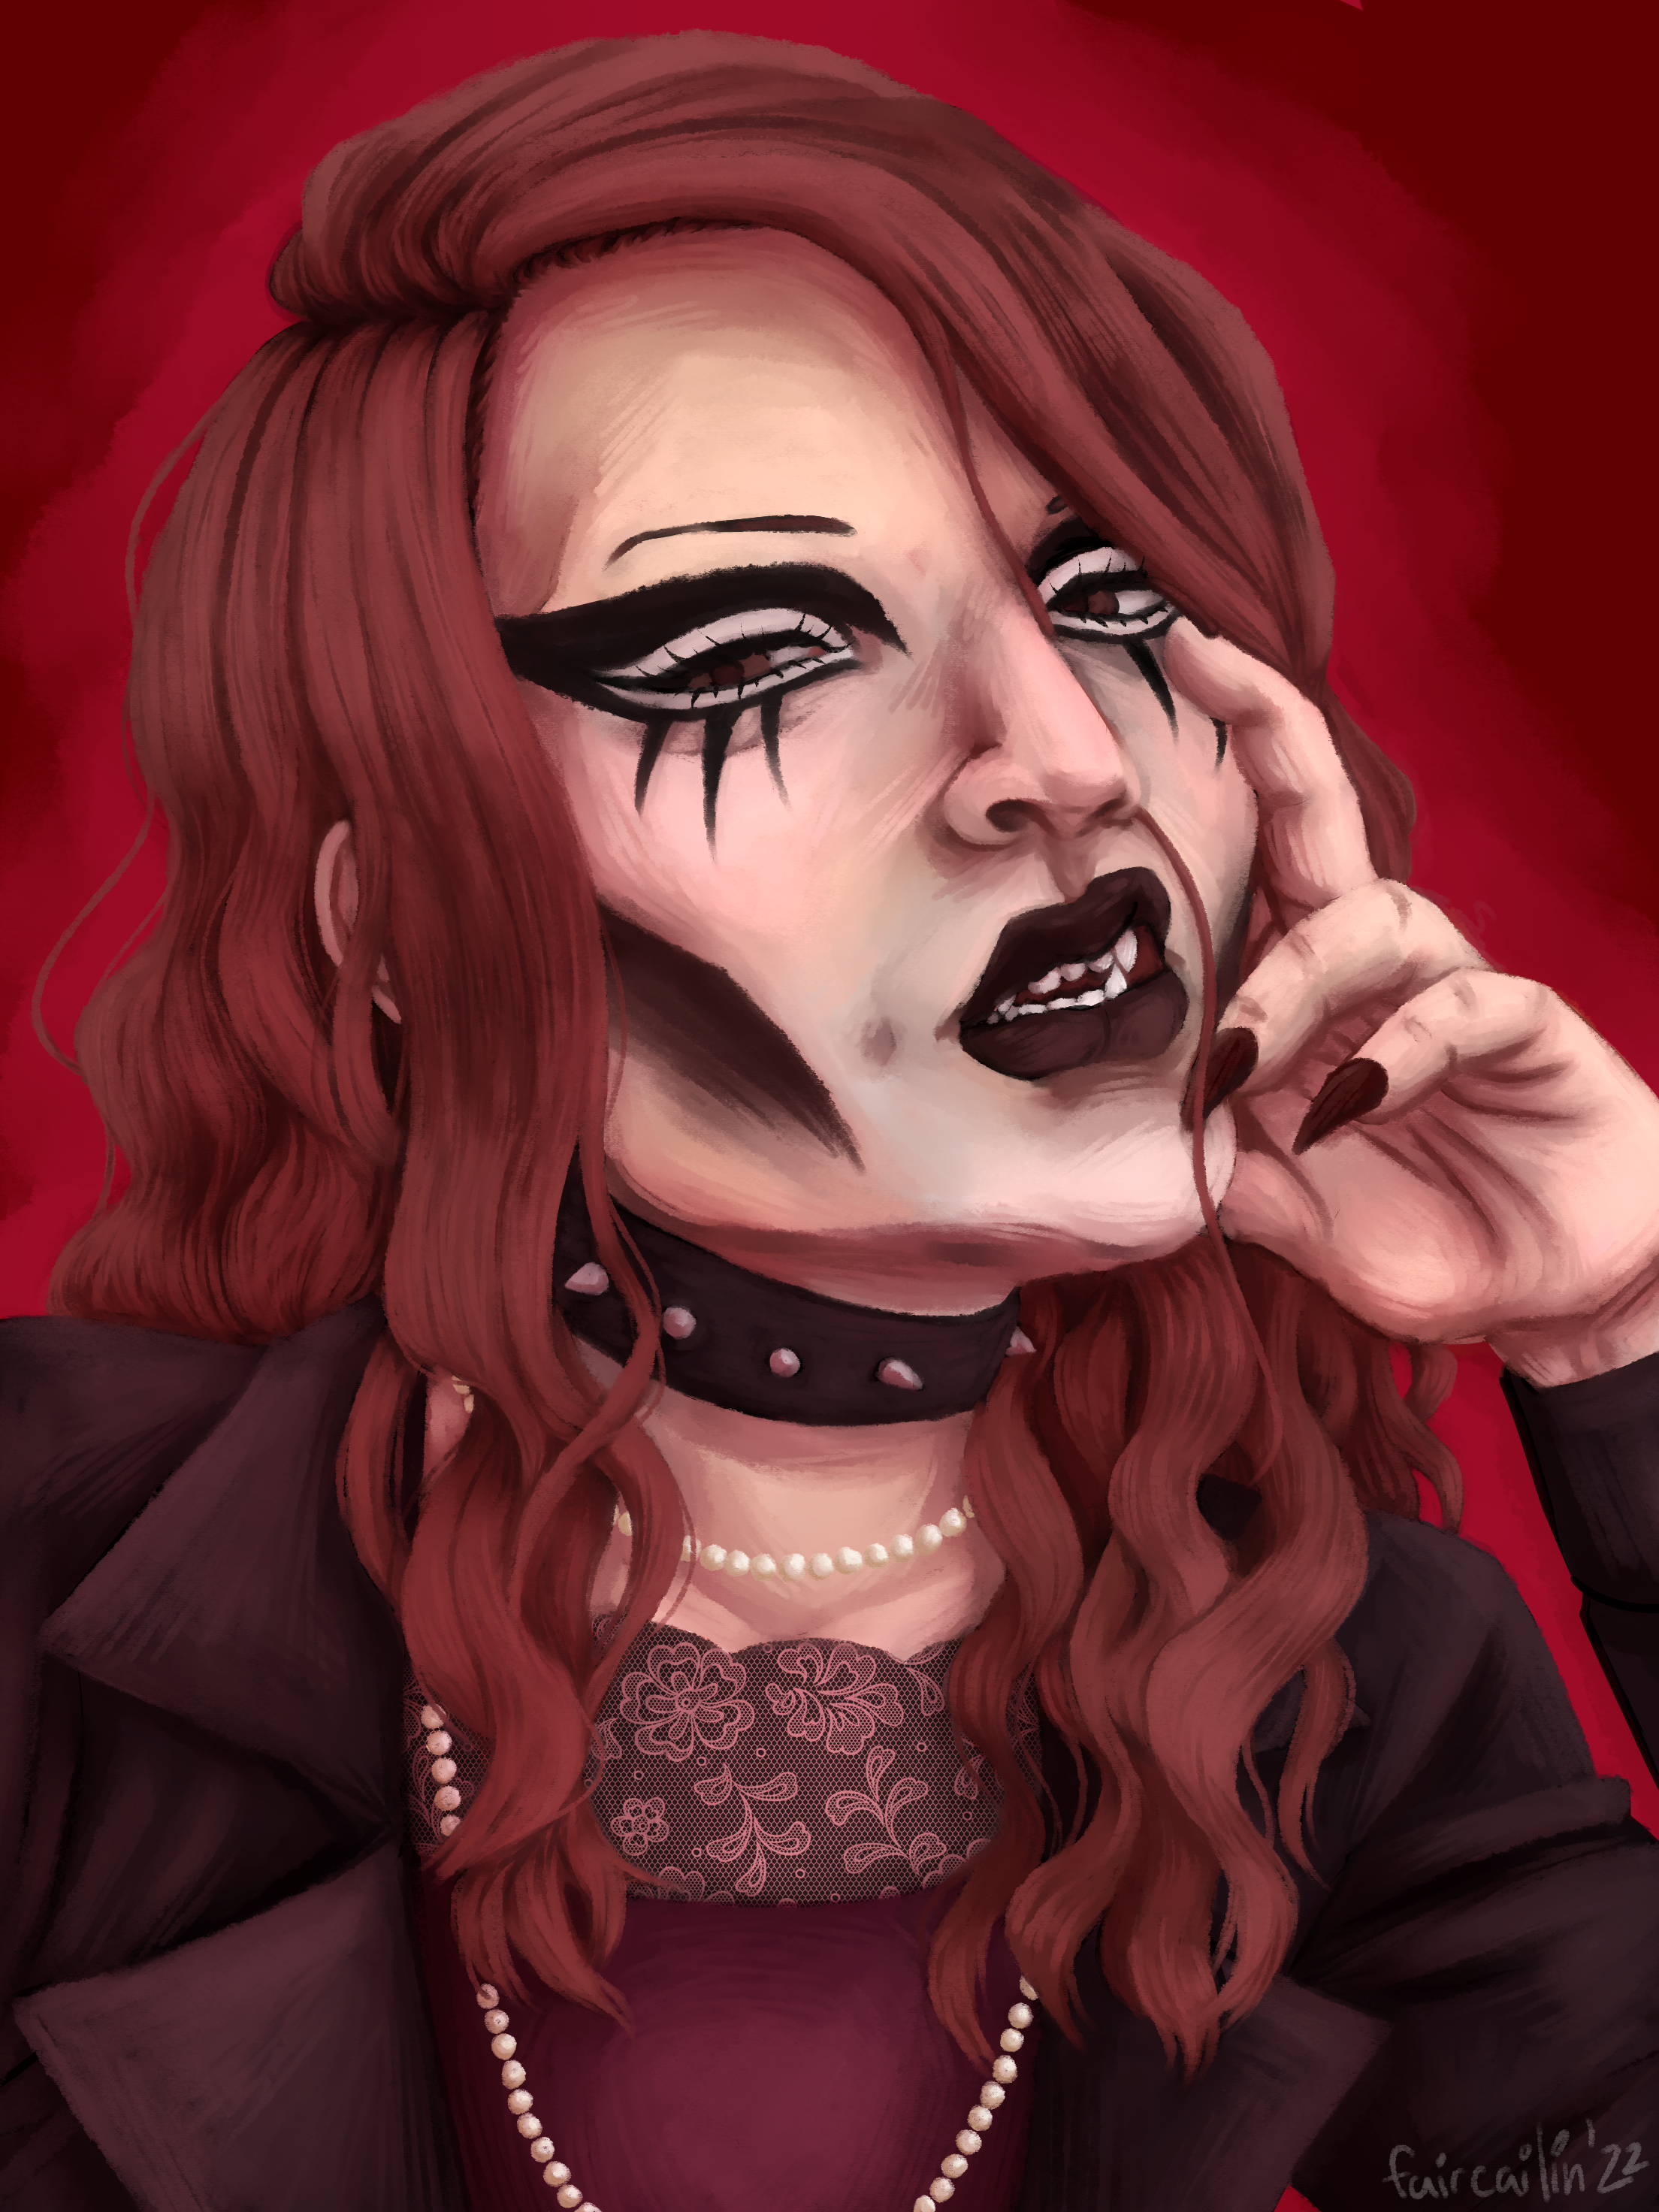 A portrait of my LA by Night OC, Gabriel Moore. He's a white vampire in his mid-twenties with long, curly, red hair and brown eyes. He's wearing a blouse with a lace collar, a pearl necklace, spiked collar, and a black jacket. He has exaggerated gothic makeup, and looks to the viewer with a bored expression.